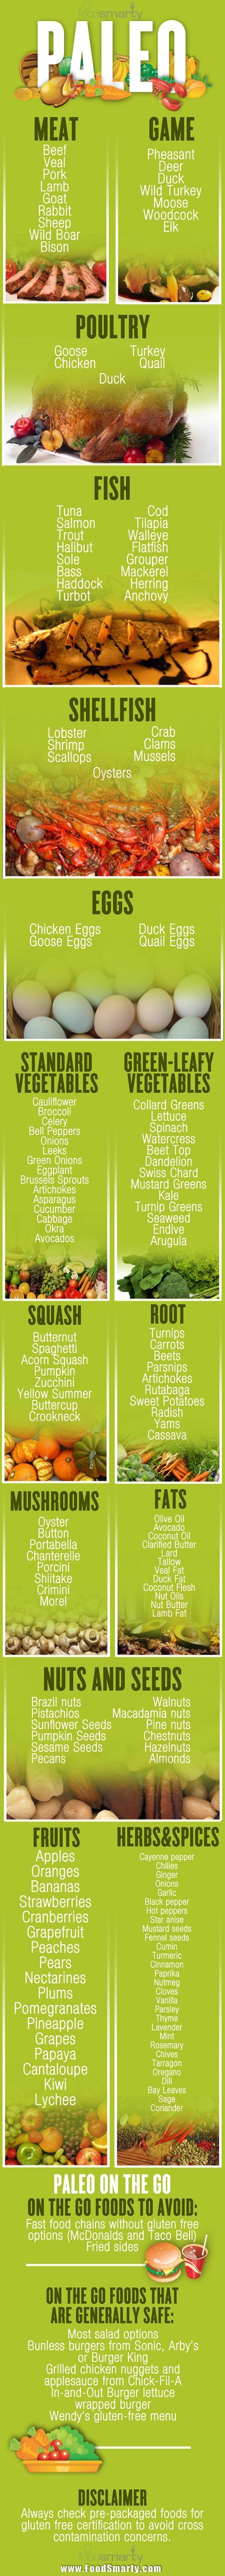 Paleo Diet Info Graphic – Quick Reference Card